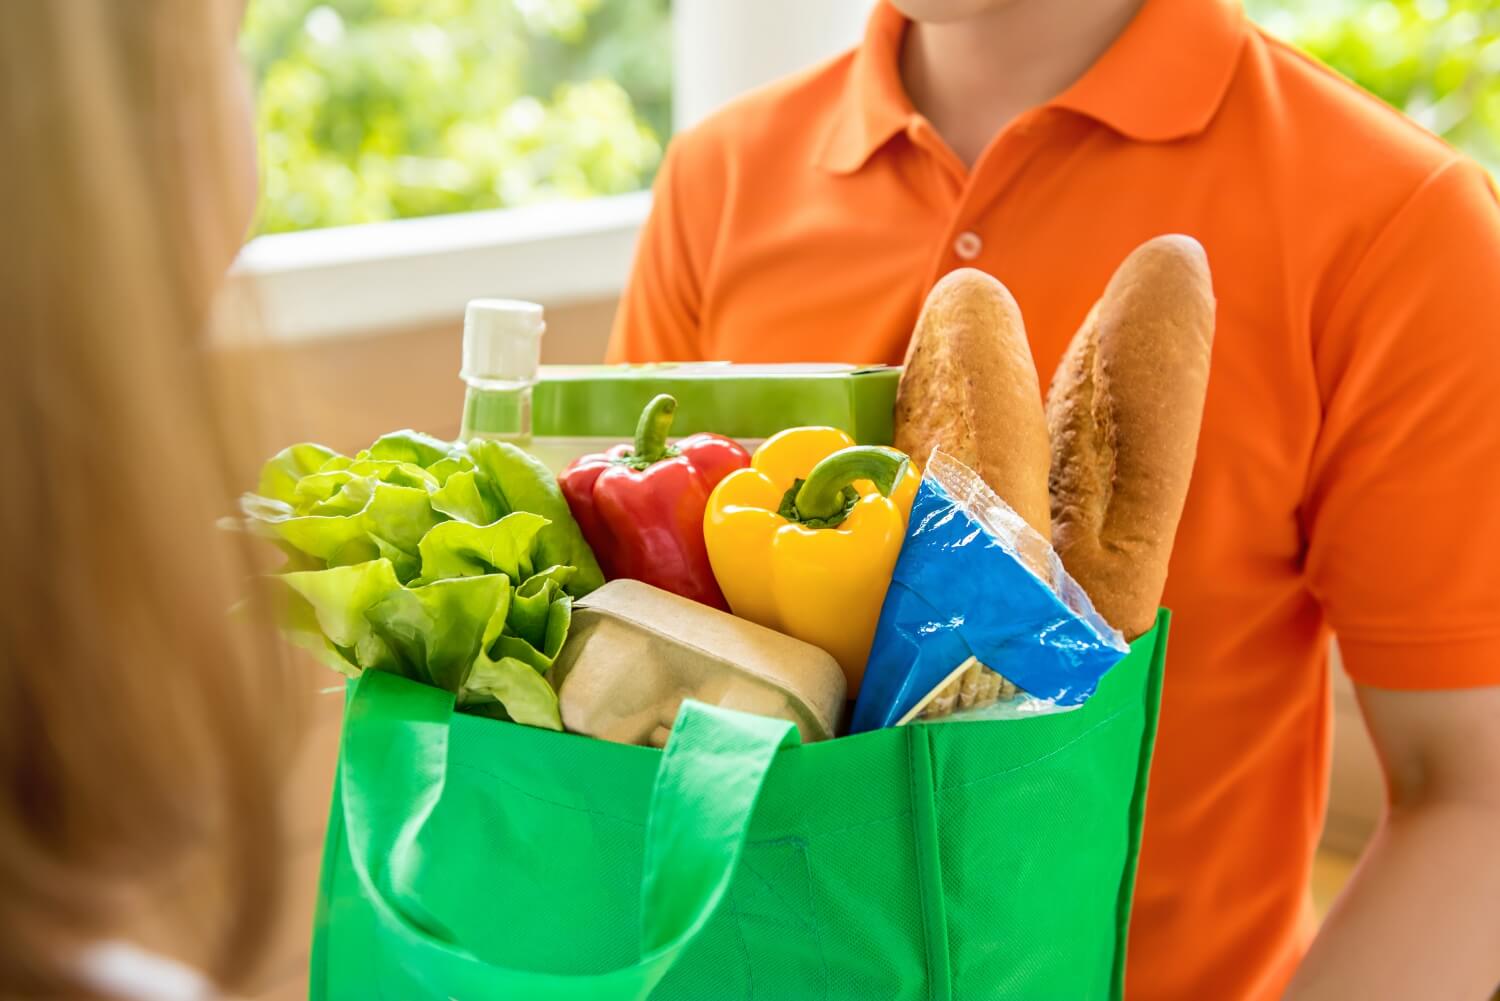 Walmart Express Delivery launches with 2-hour grocery delivery service